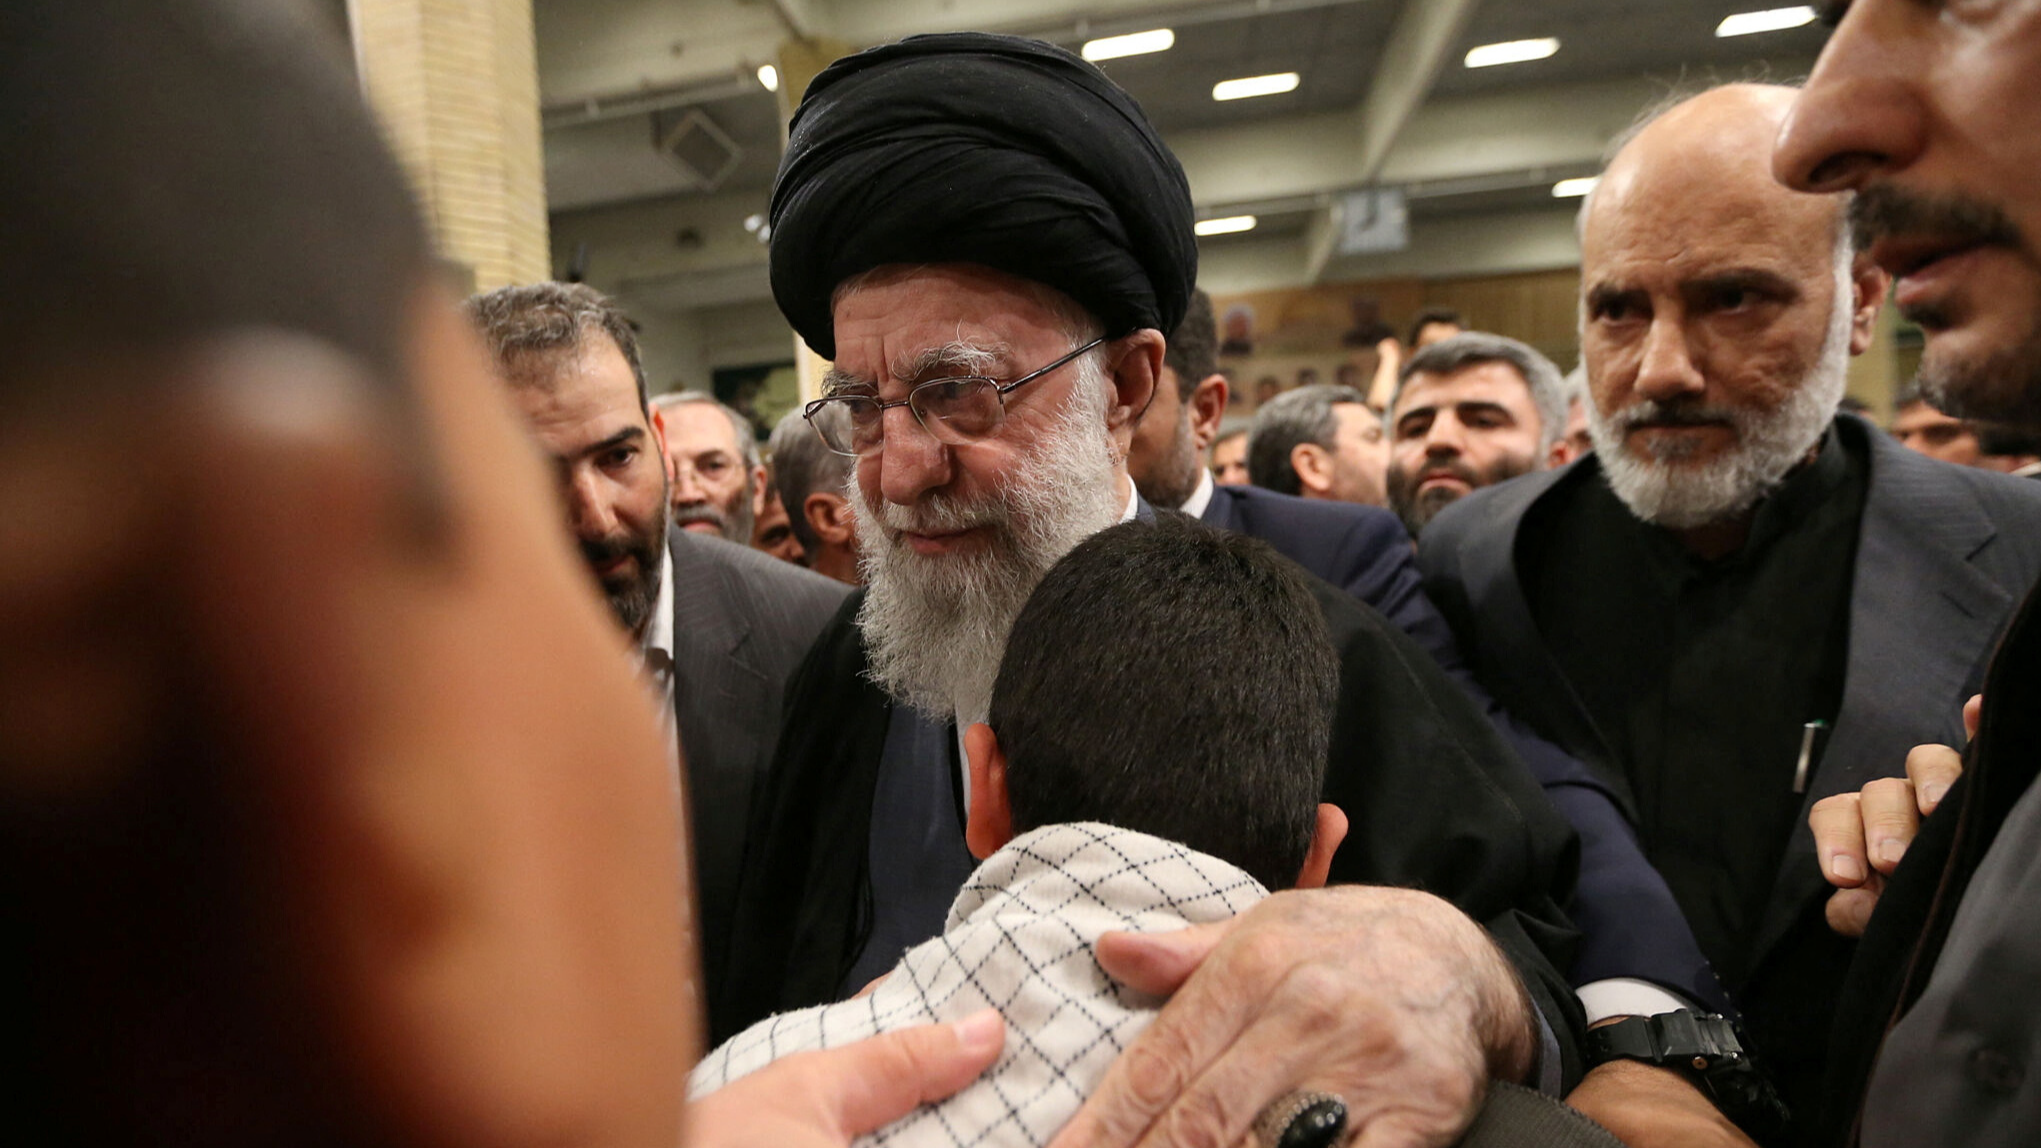 Iran's Supreme Leader, Ayatollah Ali Khamenei, meets with the family of one of the members of the Islamic Revolutionary Guard Corps who were killed in the Israeli airstrike. /Office of the Iranian Supreme Leader/WANA/ via REUTERS